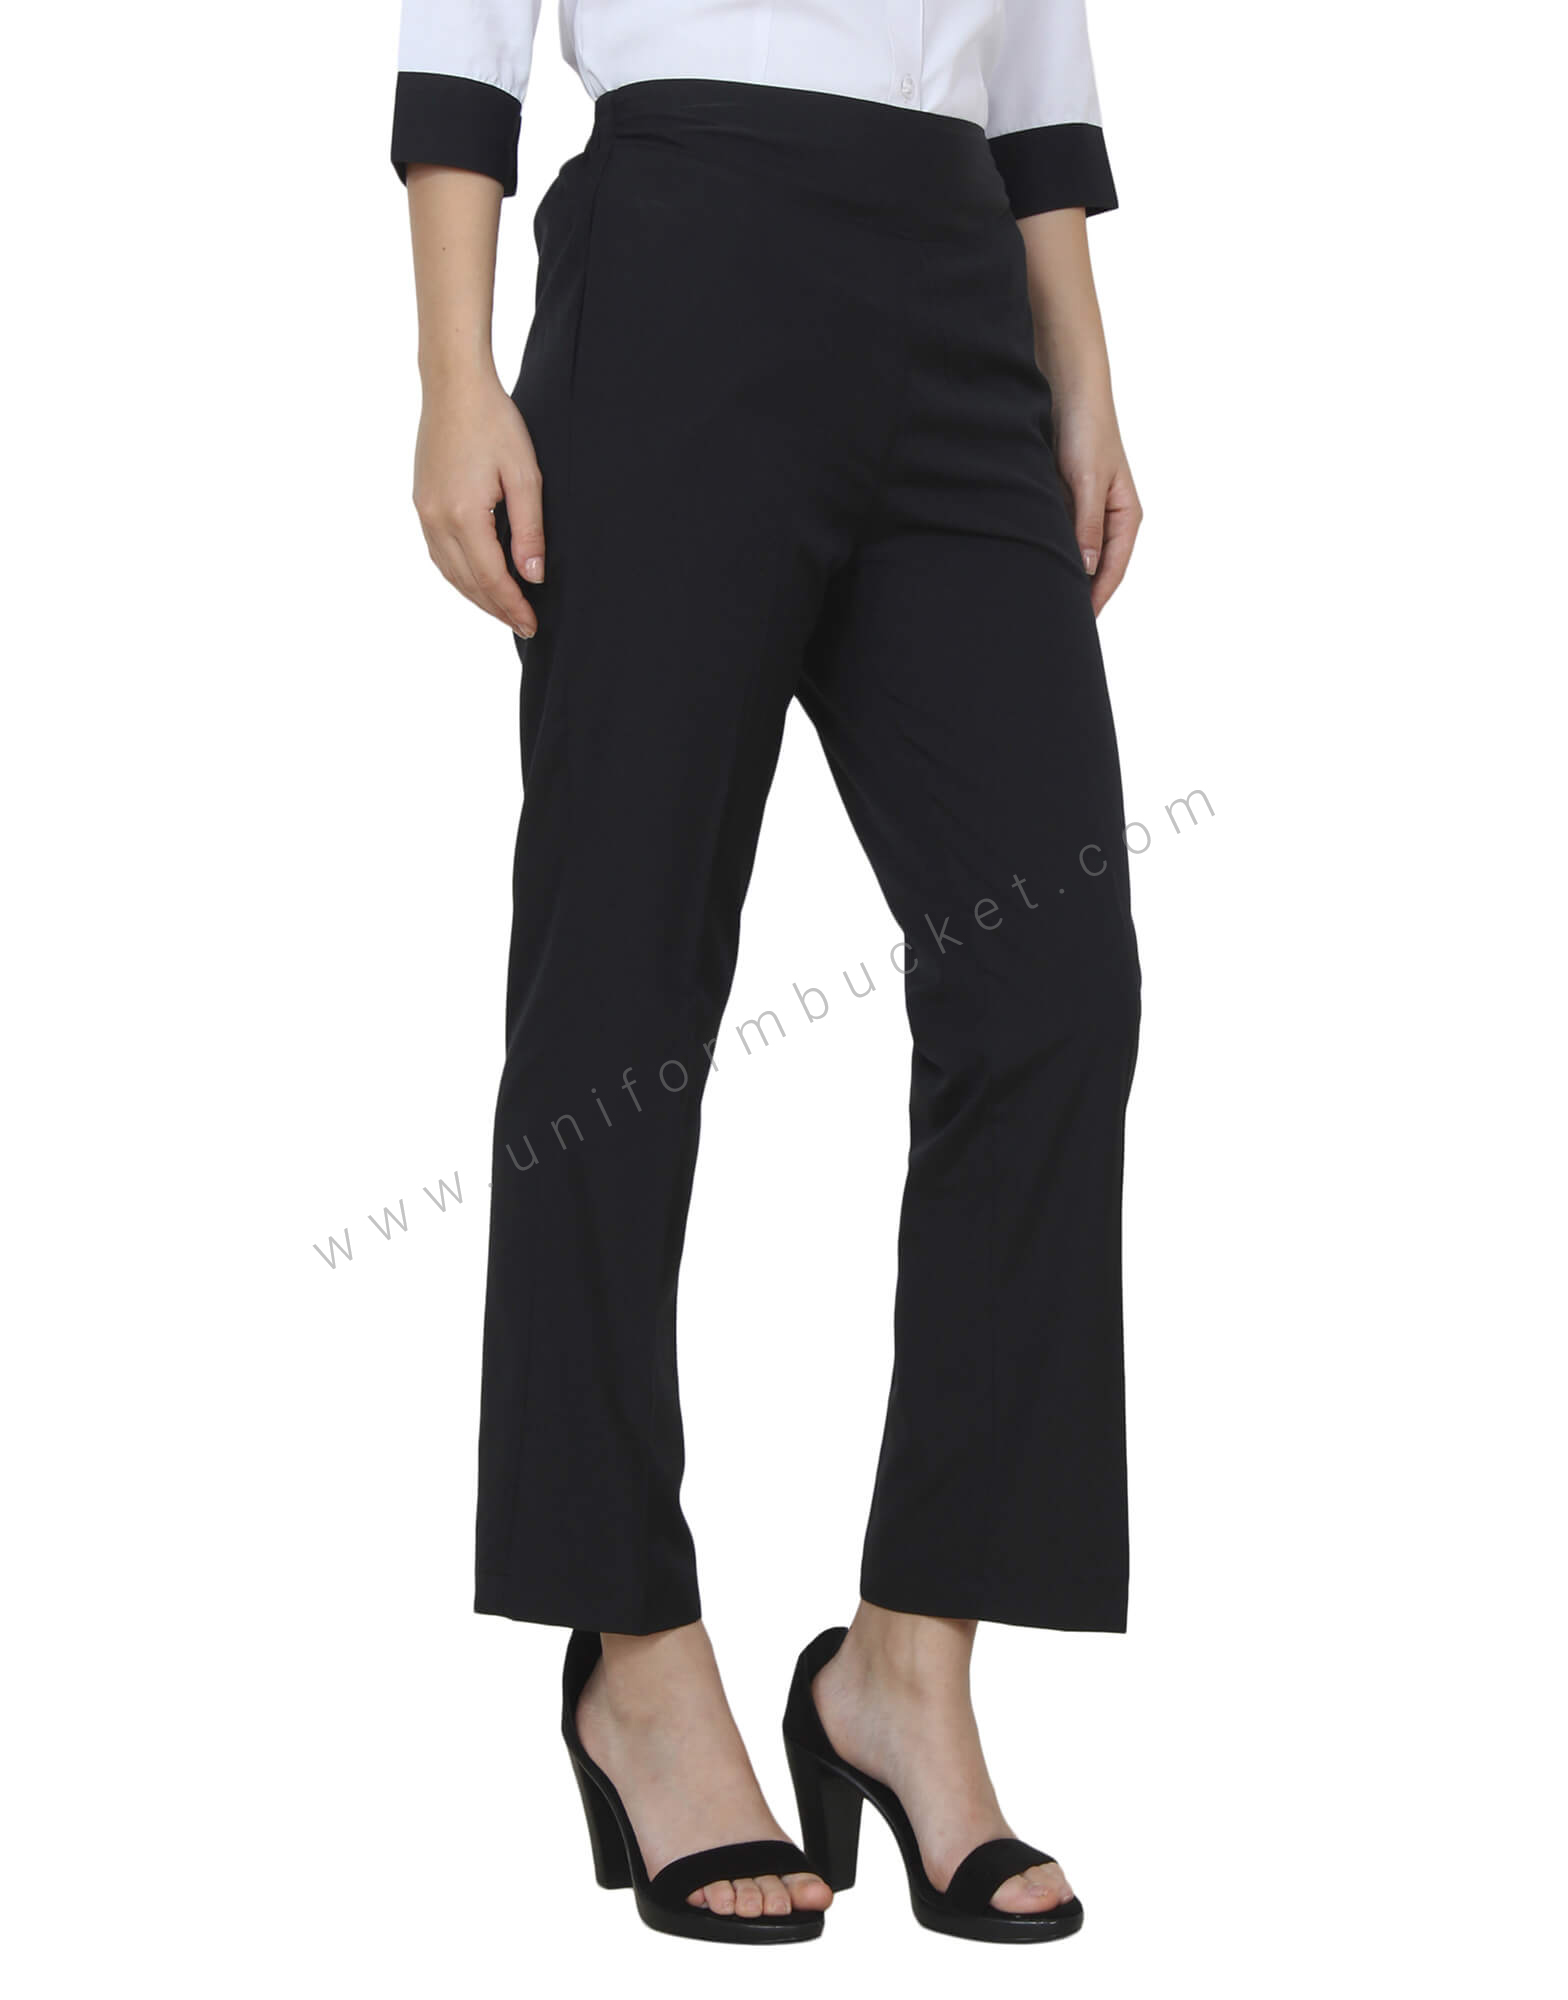 Thoughts on Zara trousers? I am a little scared to buy these because of  mixed reviews about the fit online. They are quite expensive too. Anyone  who is around 28-30 waist size,